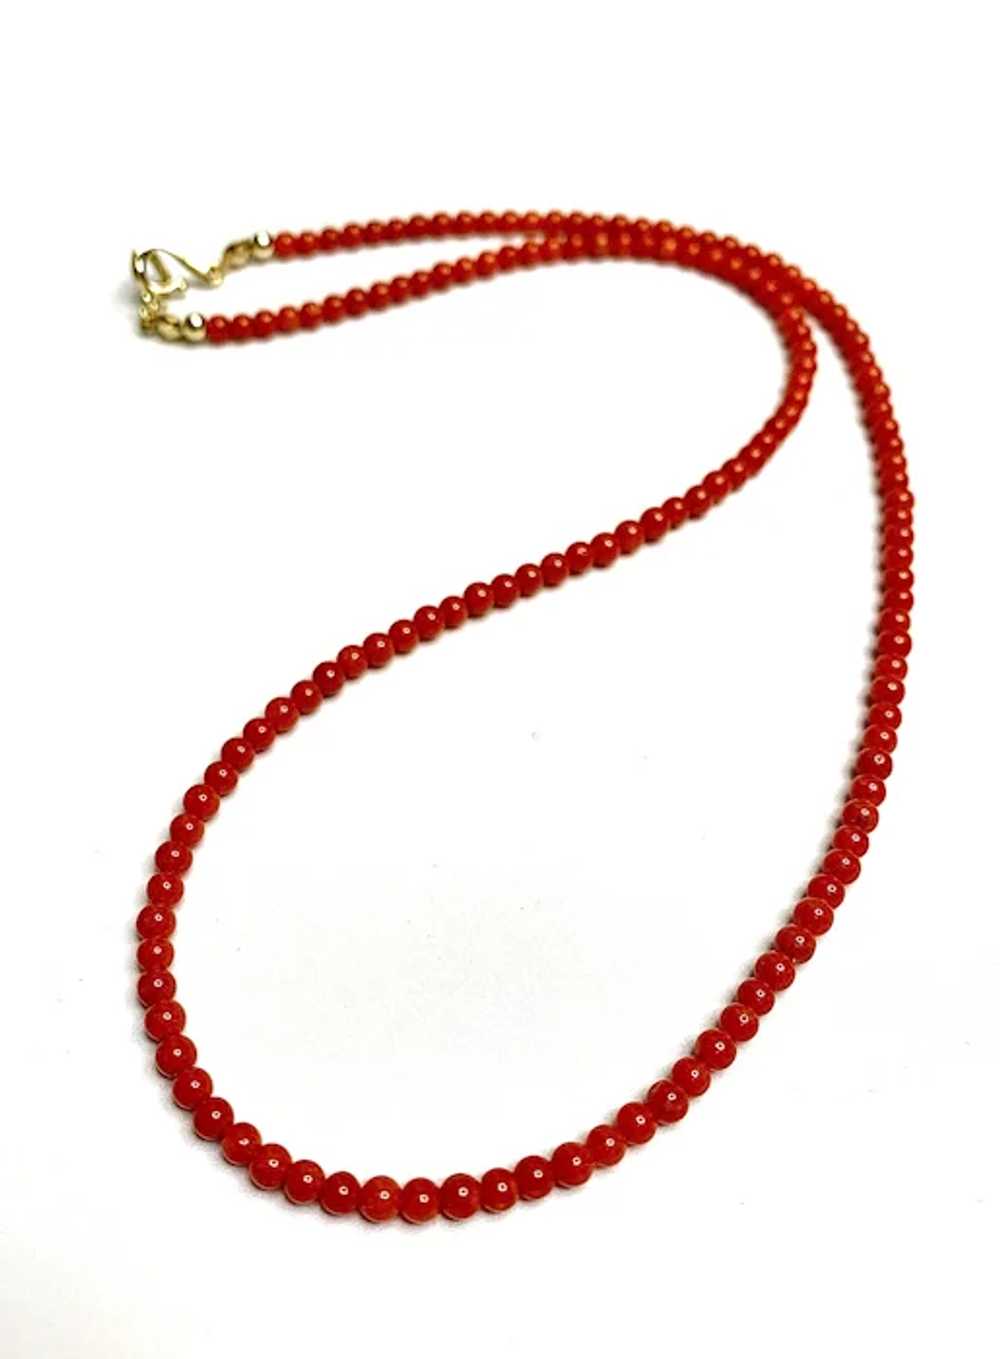 Genuine Italian Coral and 14k Gold Necklace - image 2